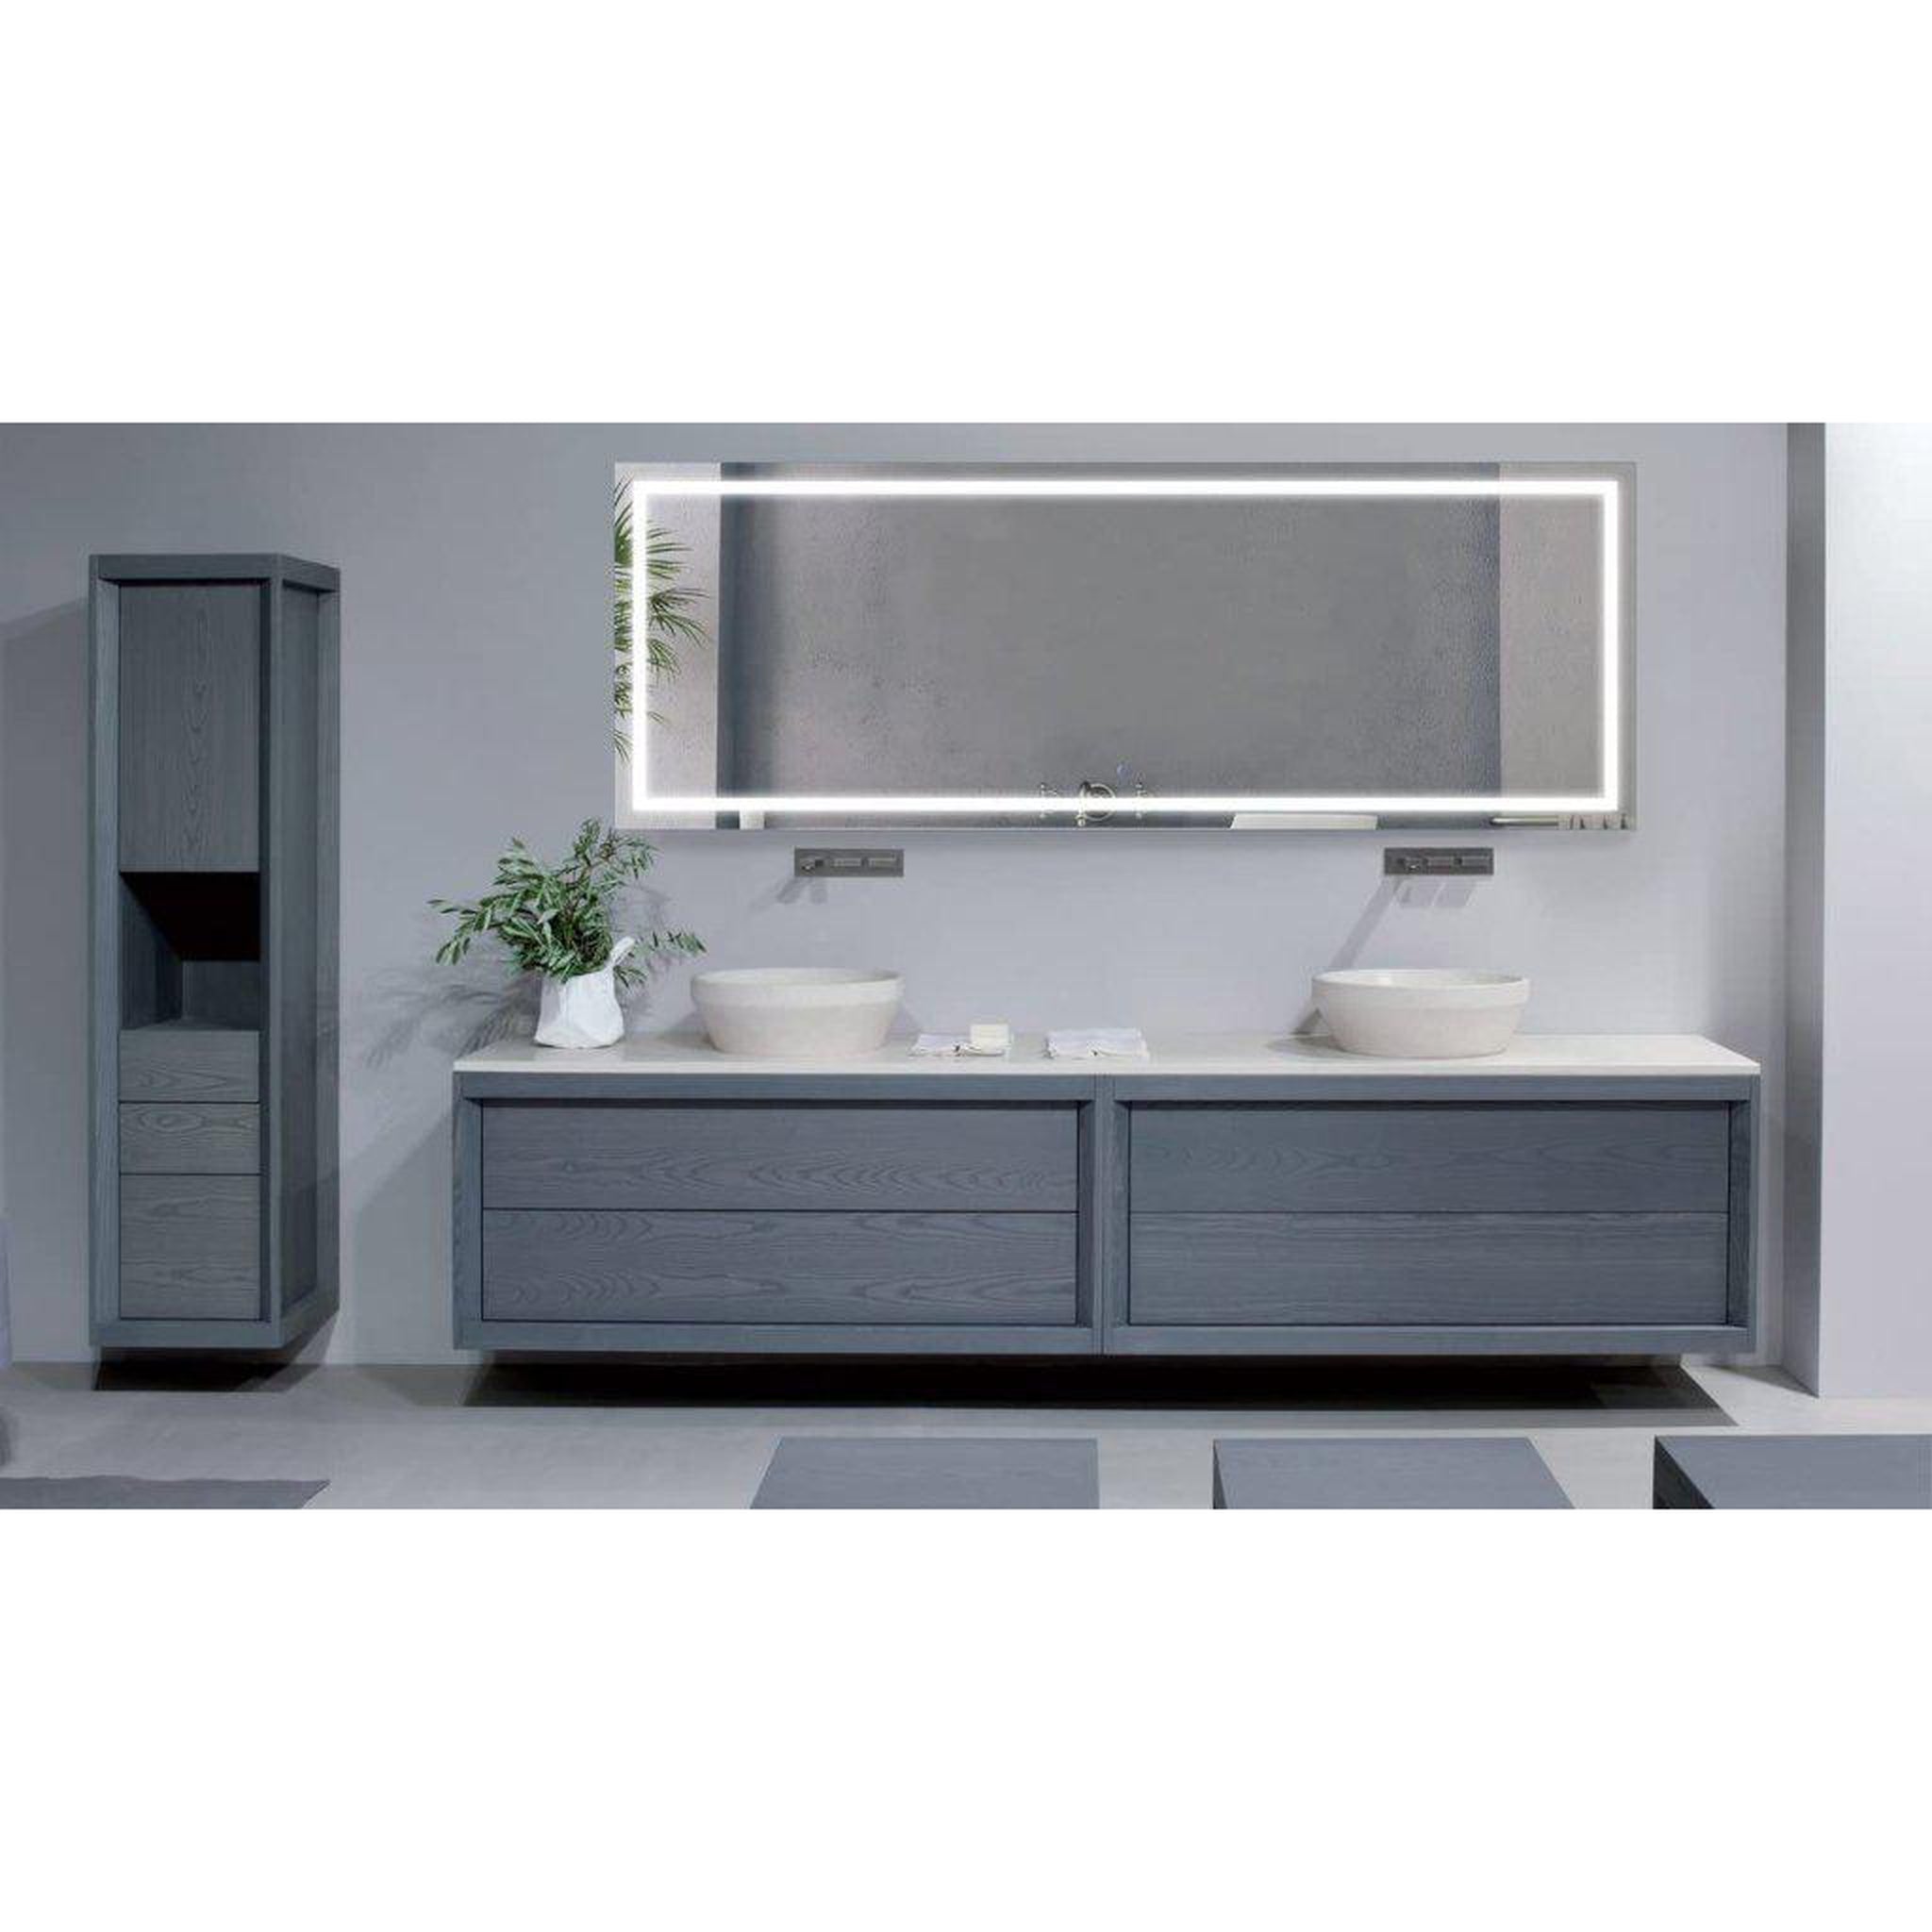 Krugg Reflections, Krugg Reflections Icon 84" x 30" 5000K Rectangular Wall-Mounted Illuminated Silver Backed LED Mirror With Built-in Defogger and Touch Sensor On/Off Built-in Dimmer